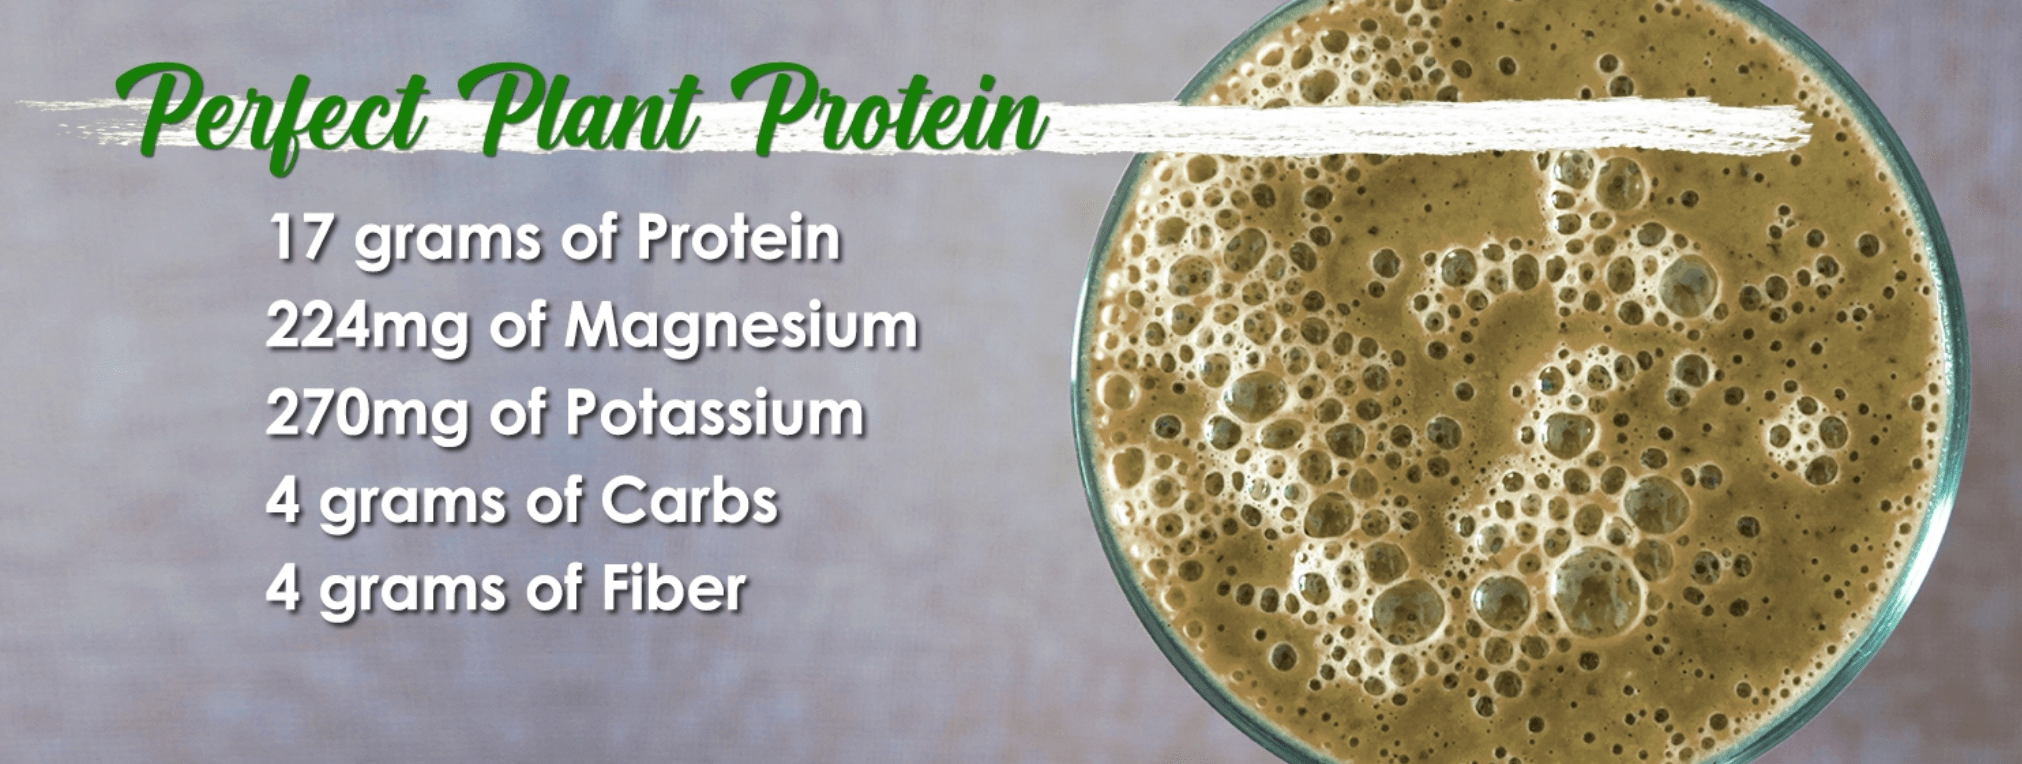 Perfect Plant Protein, a complete organic vegan protein powder.